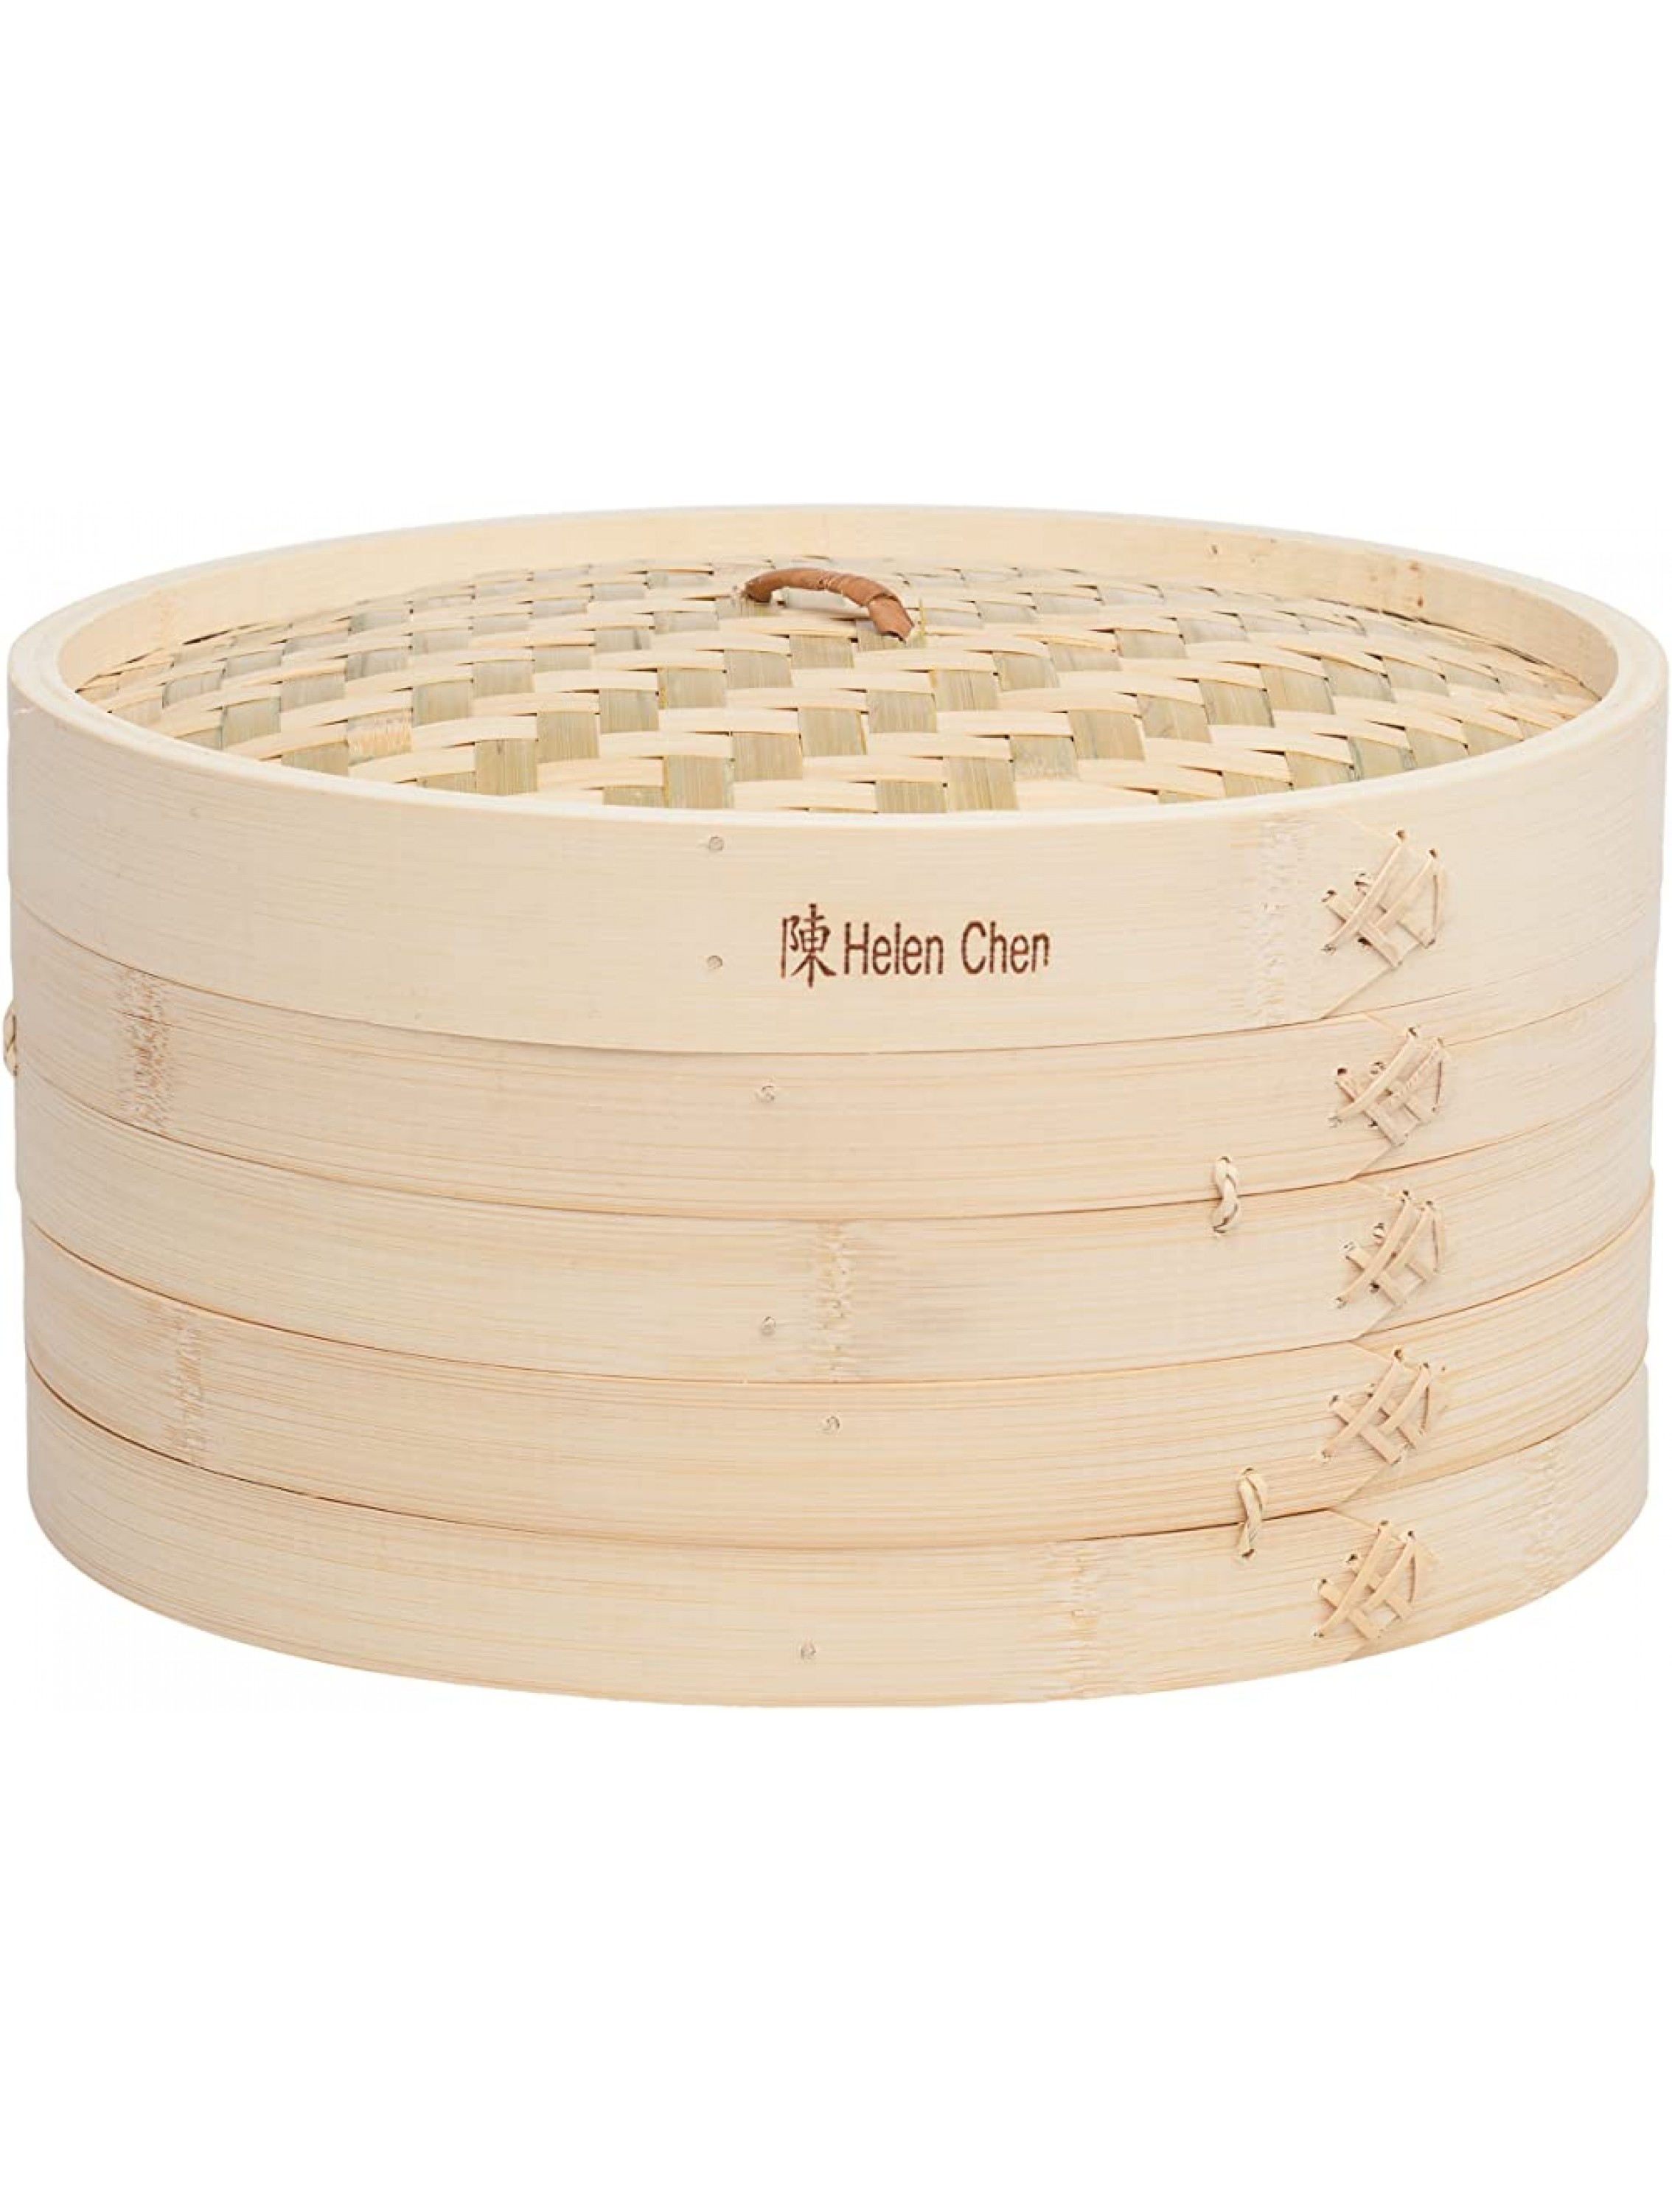 Helen’s Asian Kitchen Bamboo Food Steamer with Lid 12-Inch - BNAI2ZYPJ